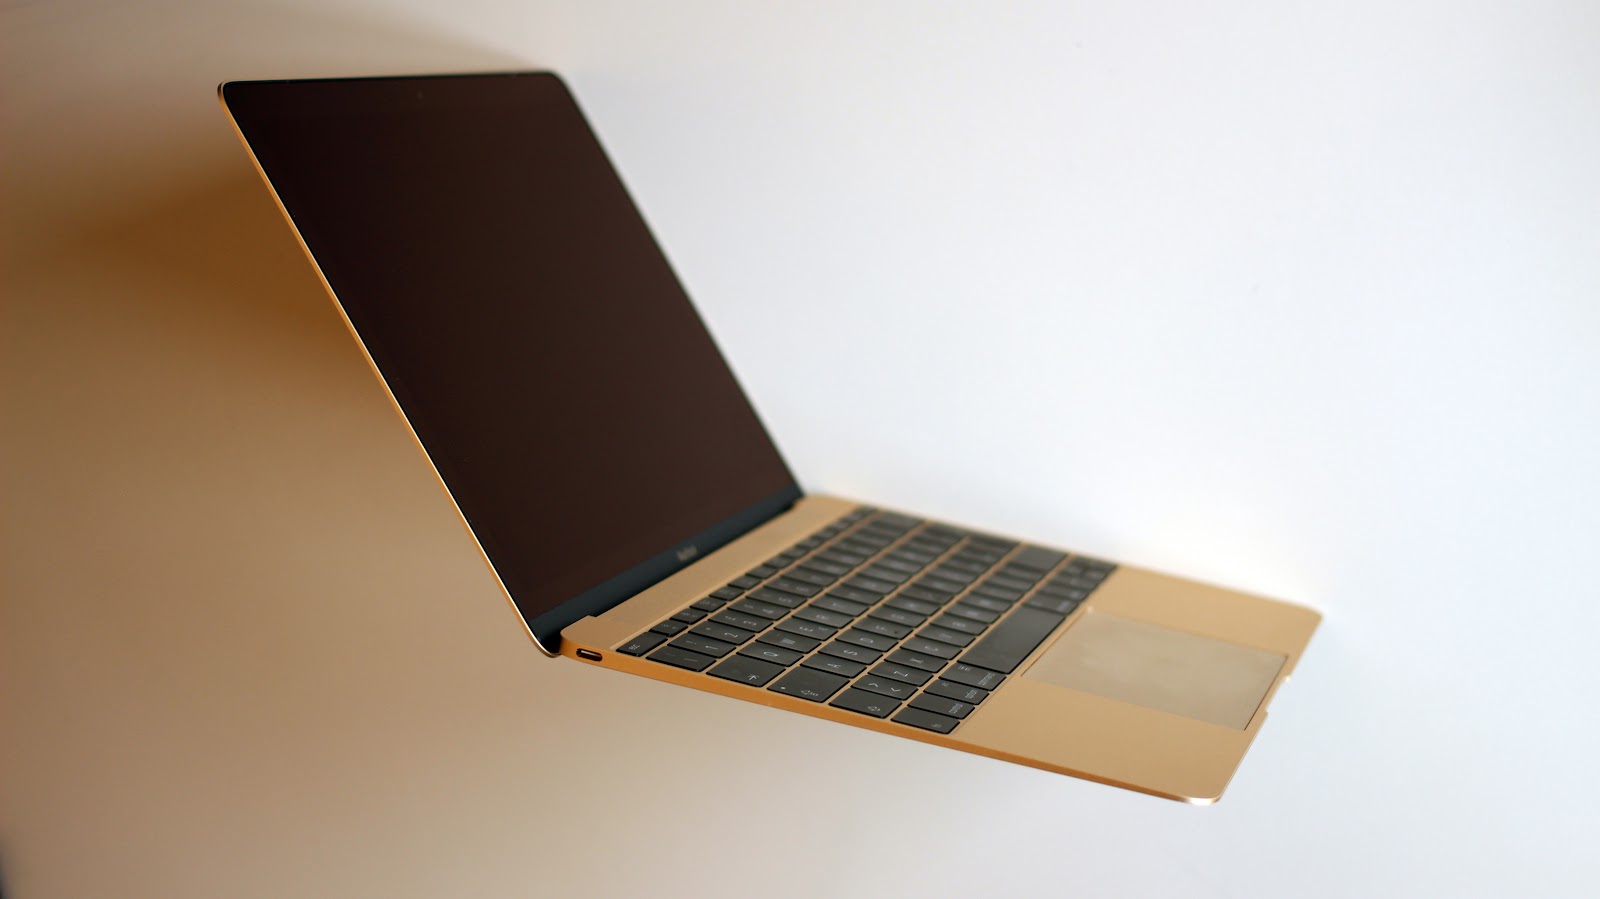 This image shows the MacBook Air in the shade full scene.